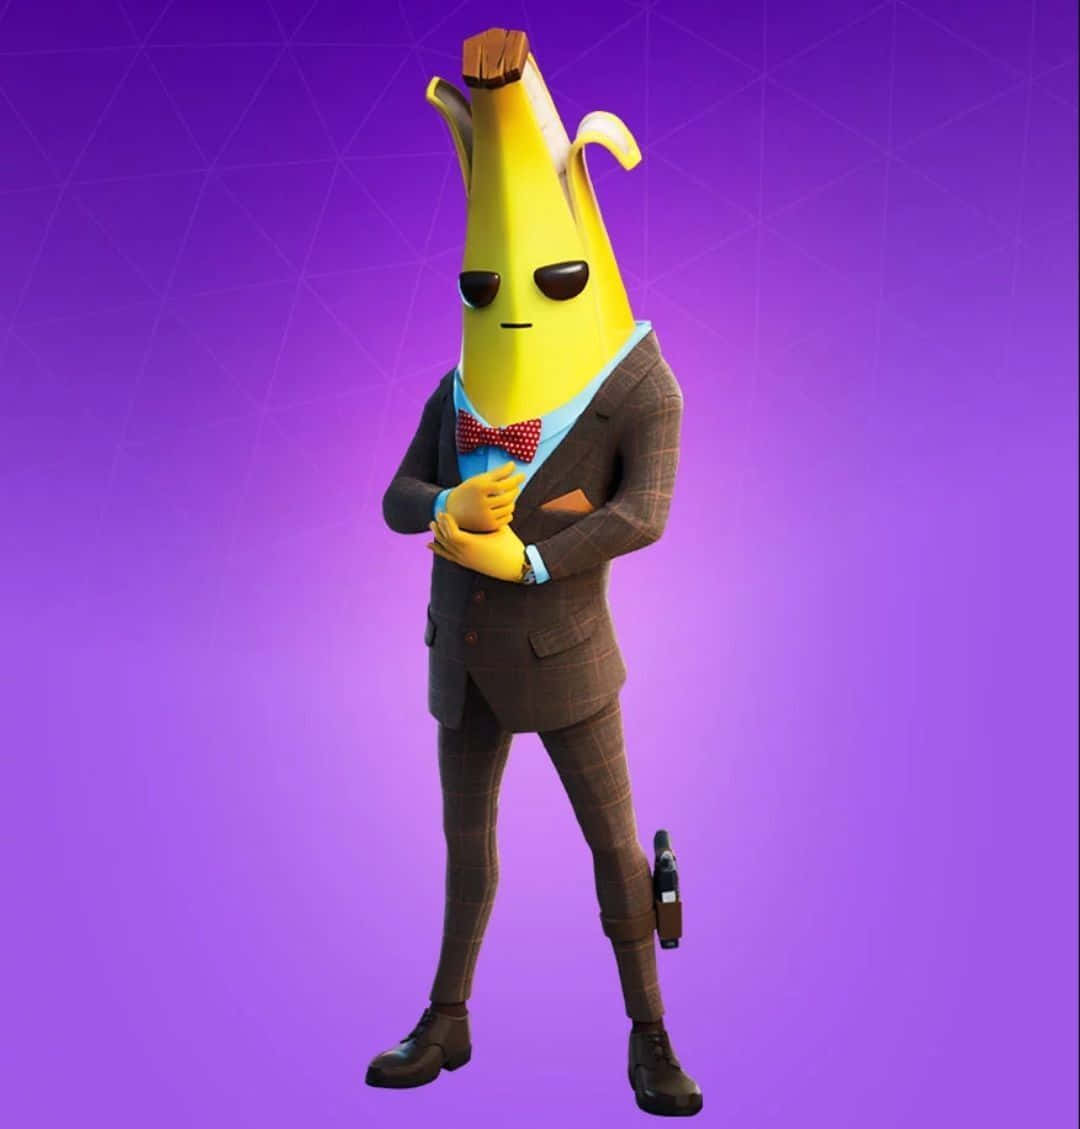 "Bring out your inner fruit with Peely for Fortnite!" Wallpaper